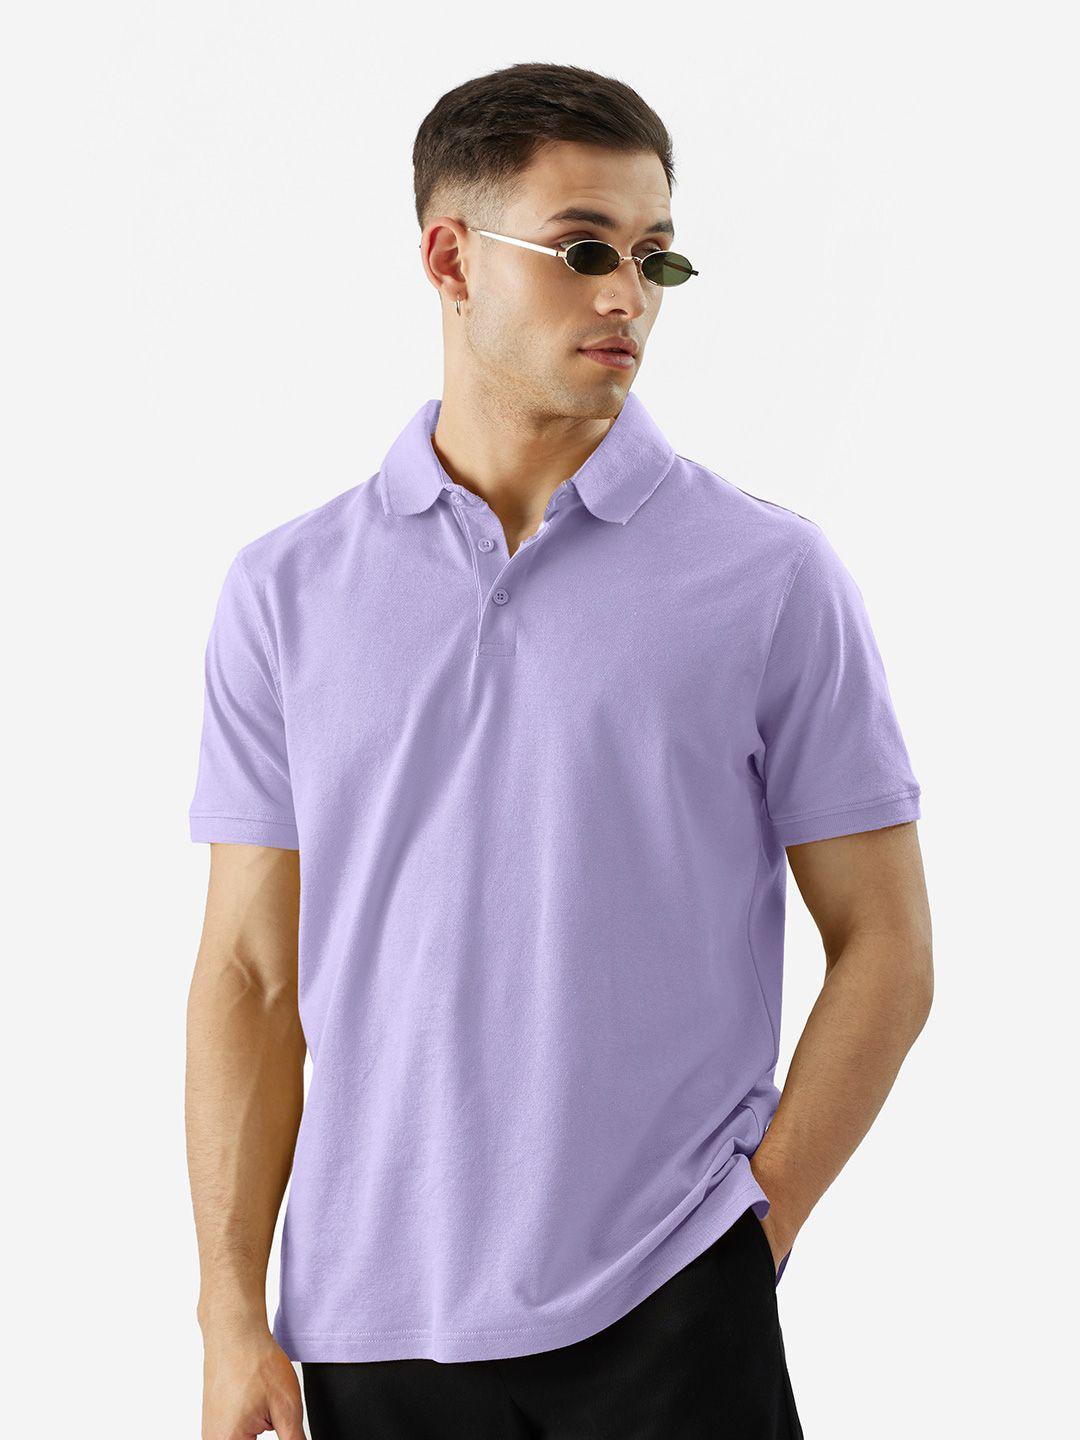 the souled store lavender polo collar t-shirt